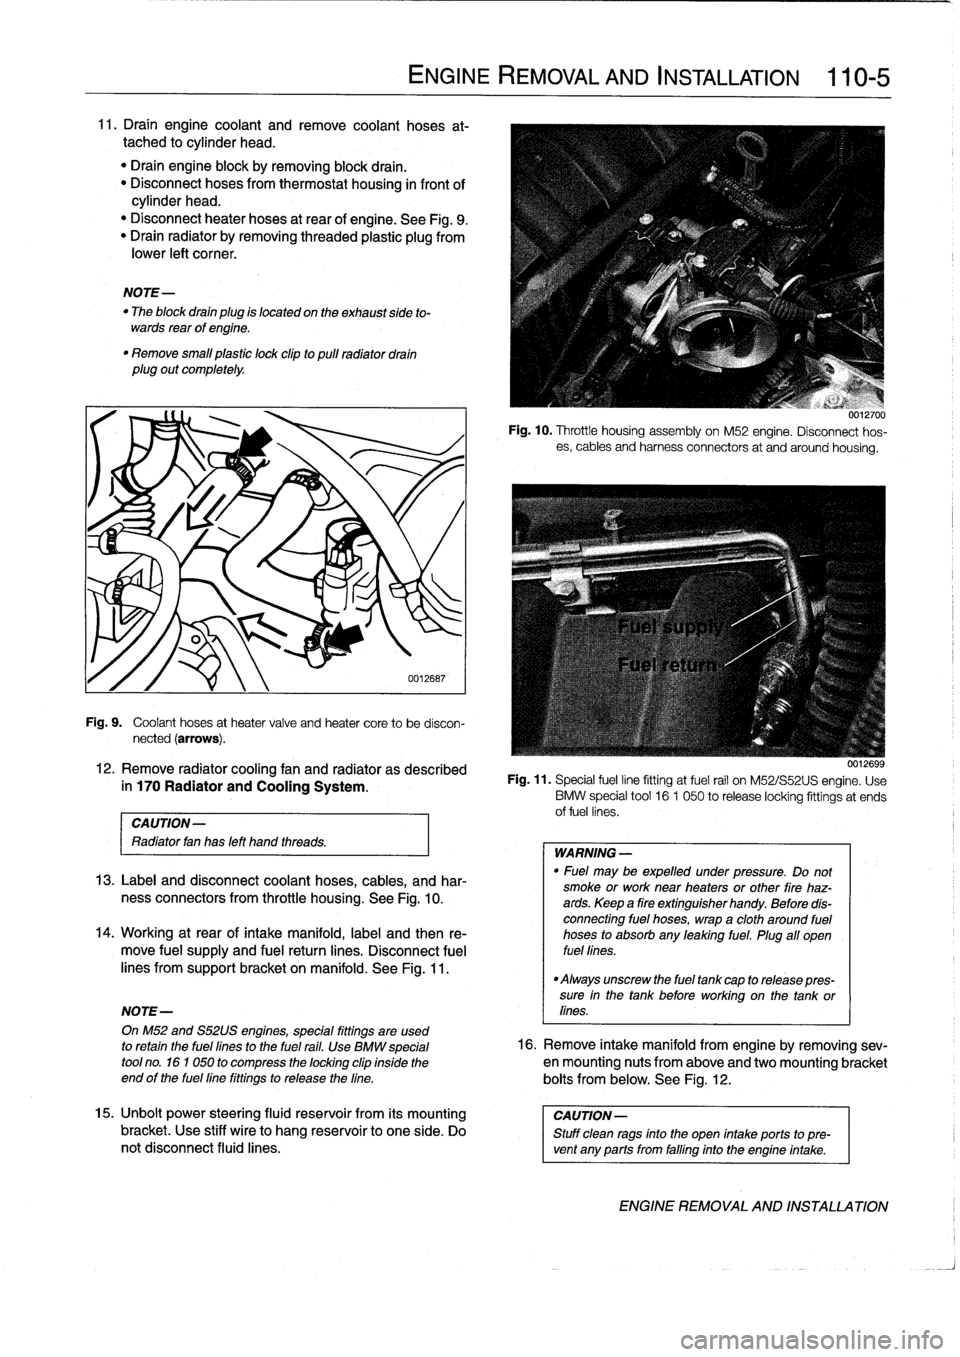 BMW 318i 1997 E36 User Guide 
11
.
Draín
engine
coolant
and
Rmove
coolant
hoses
at-
tached
to
cylinder
head
.

"
Drain
engine
block
byremoving
block
drain
.
"
Disconnect
hoses
from
thermostat
housing
in
front
of
cylinder
head
.
